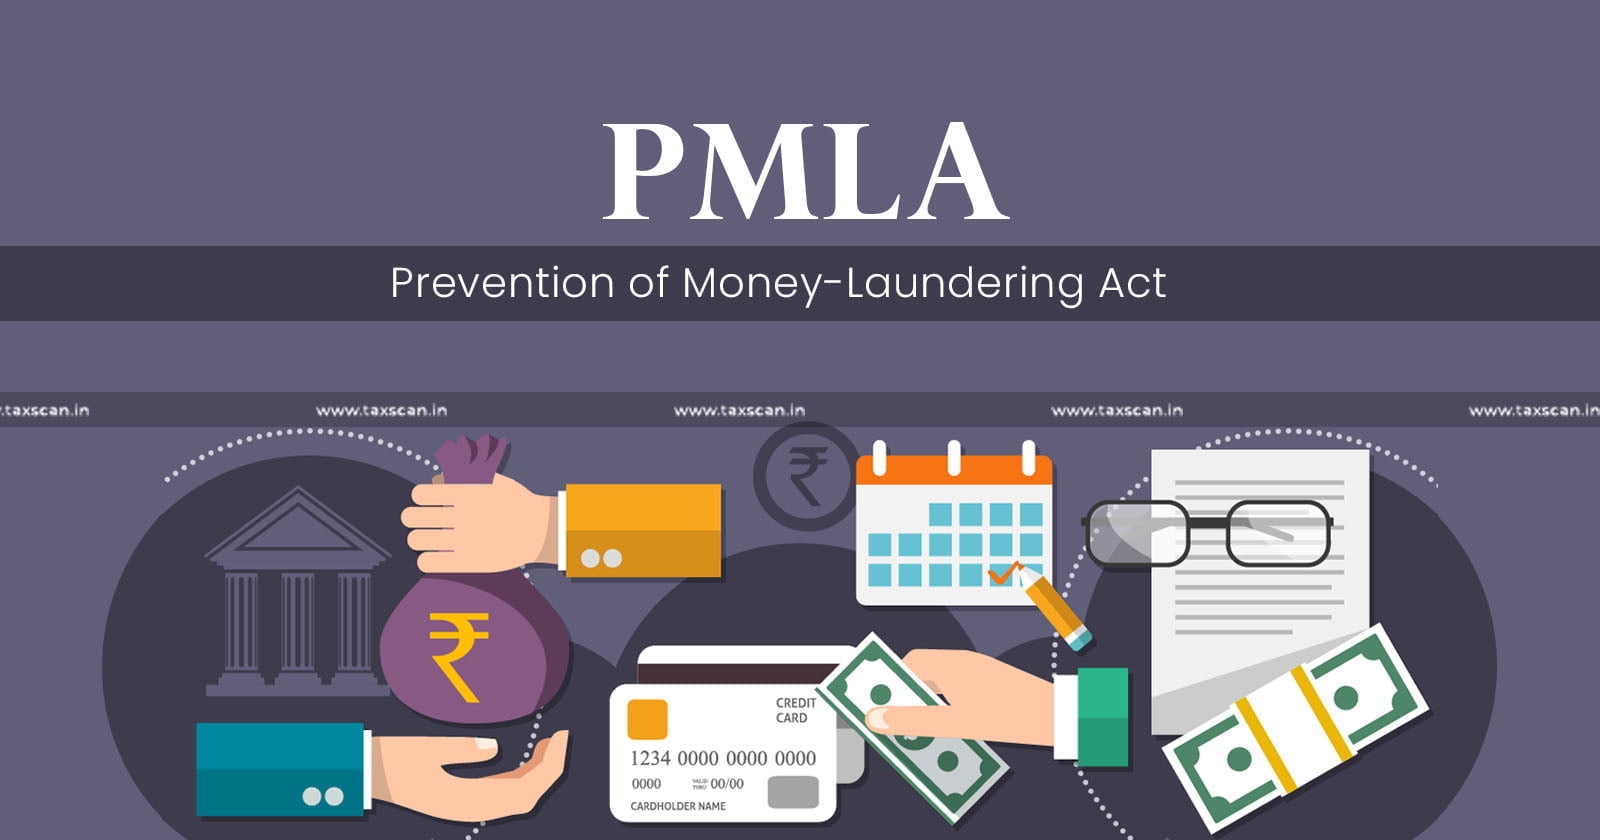 Central Govt - Central Govt amends Prevention of Money-laundering - Money-laundering - Maintenance of Records - taxscan